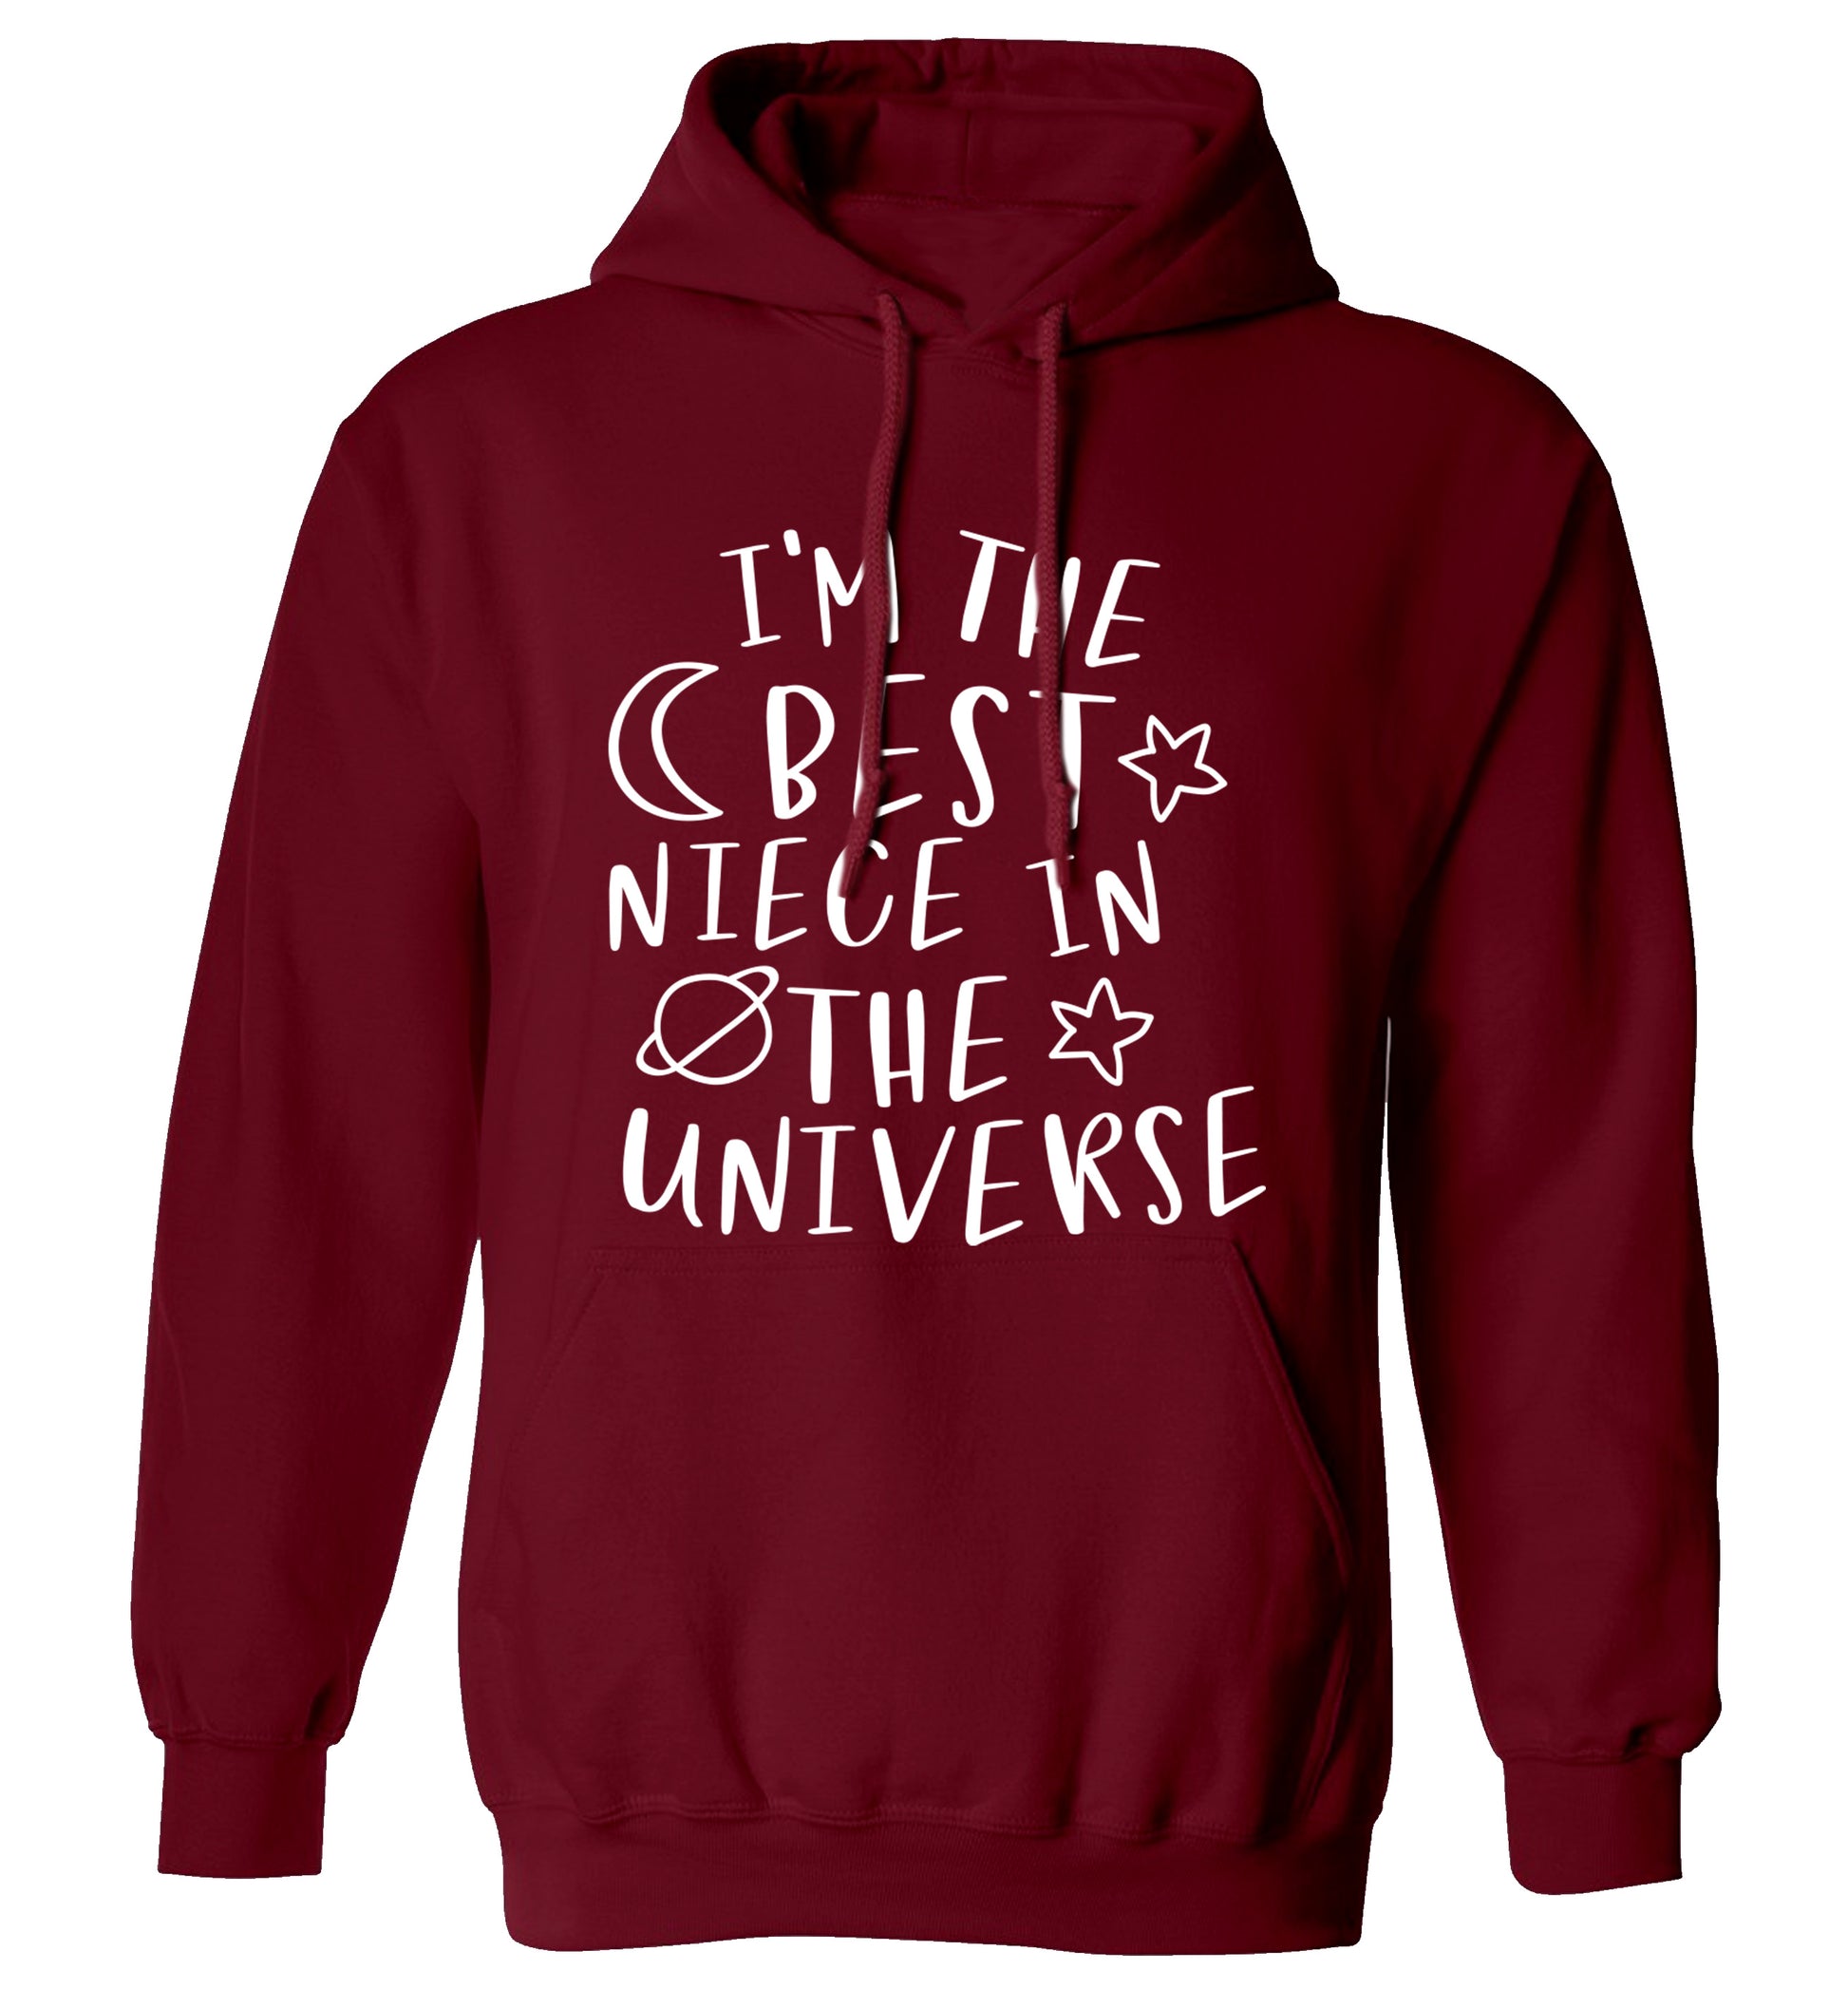 I'm the best niece in the universe adults unisex maroon hoodie 2XL